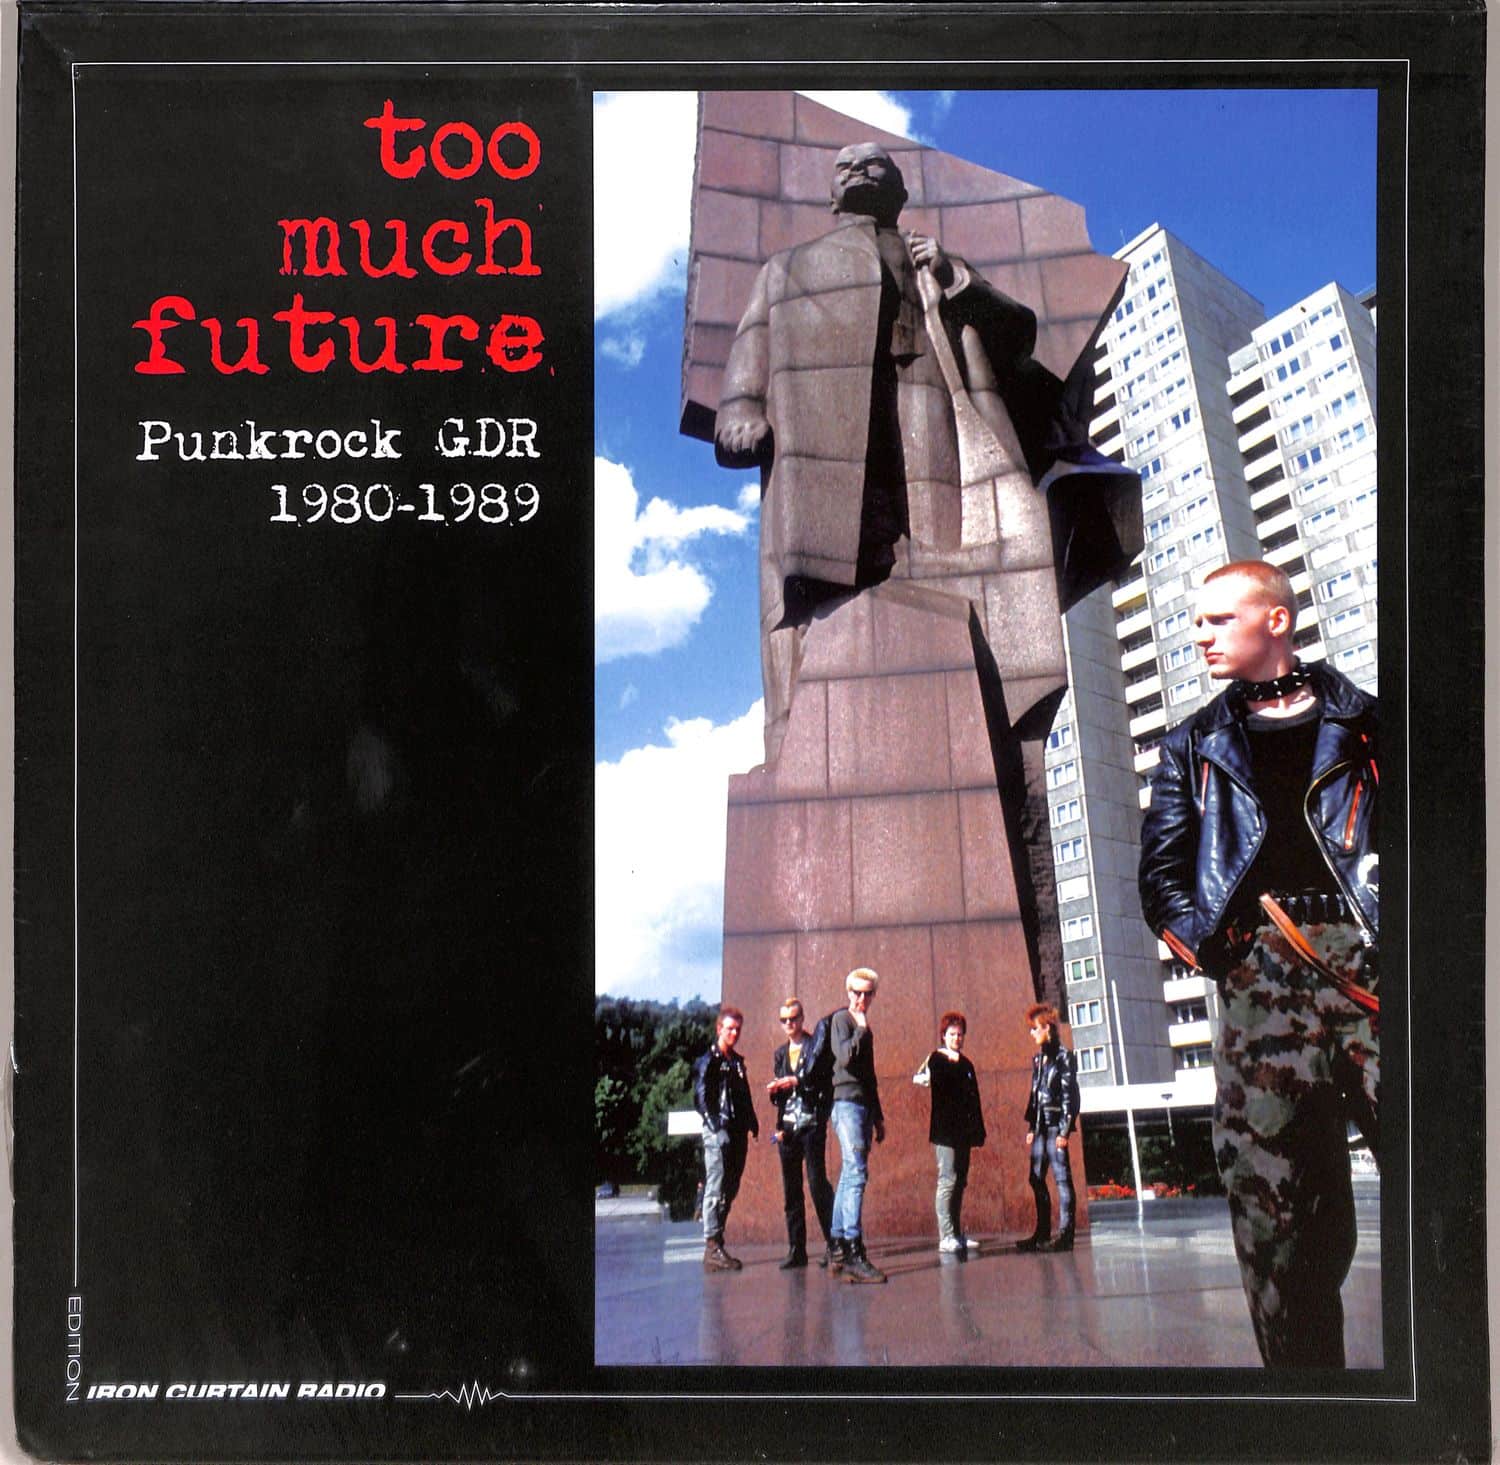 Various Artists - TOO MUCH FUTURE - PUNKROCK GDR 1980-89 